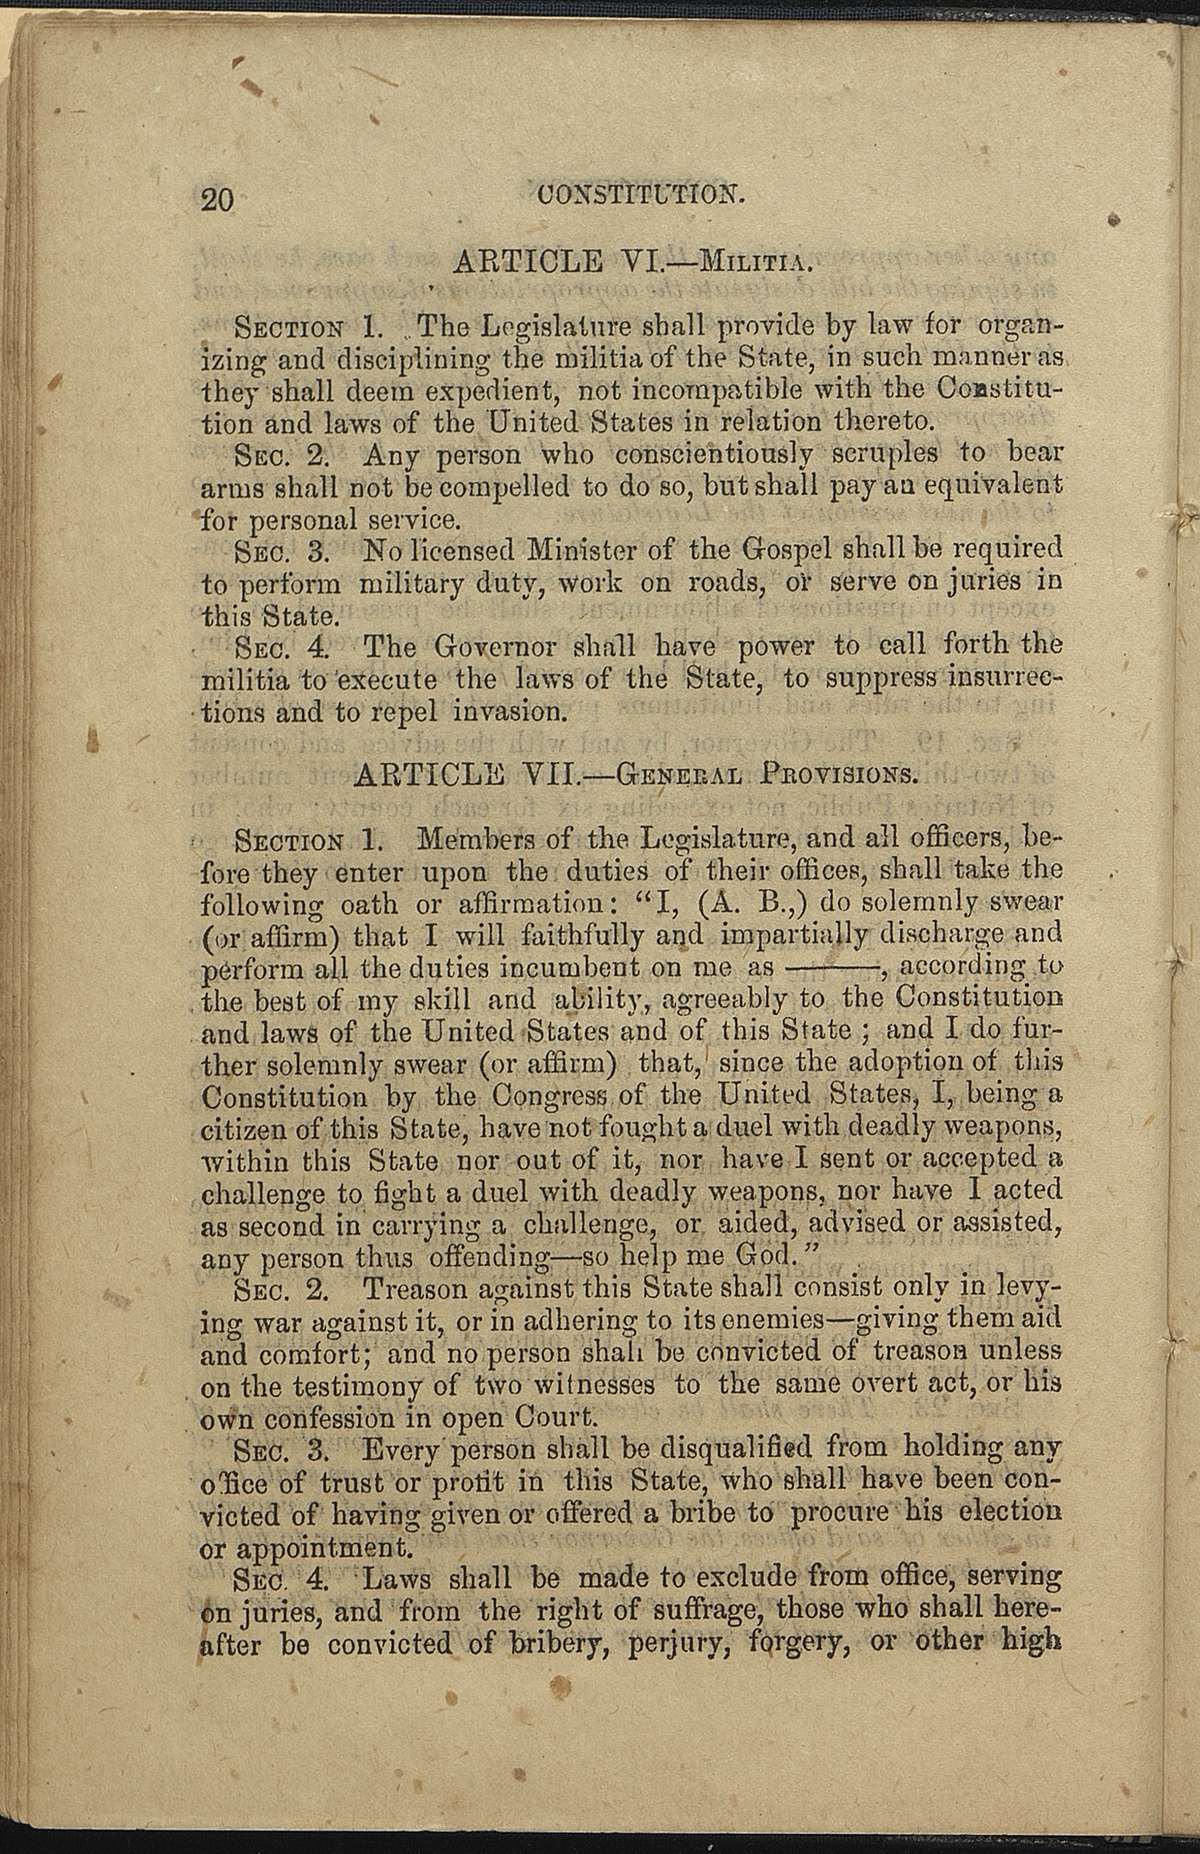 Article VII, Sections 1-4